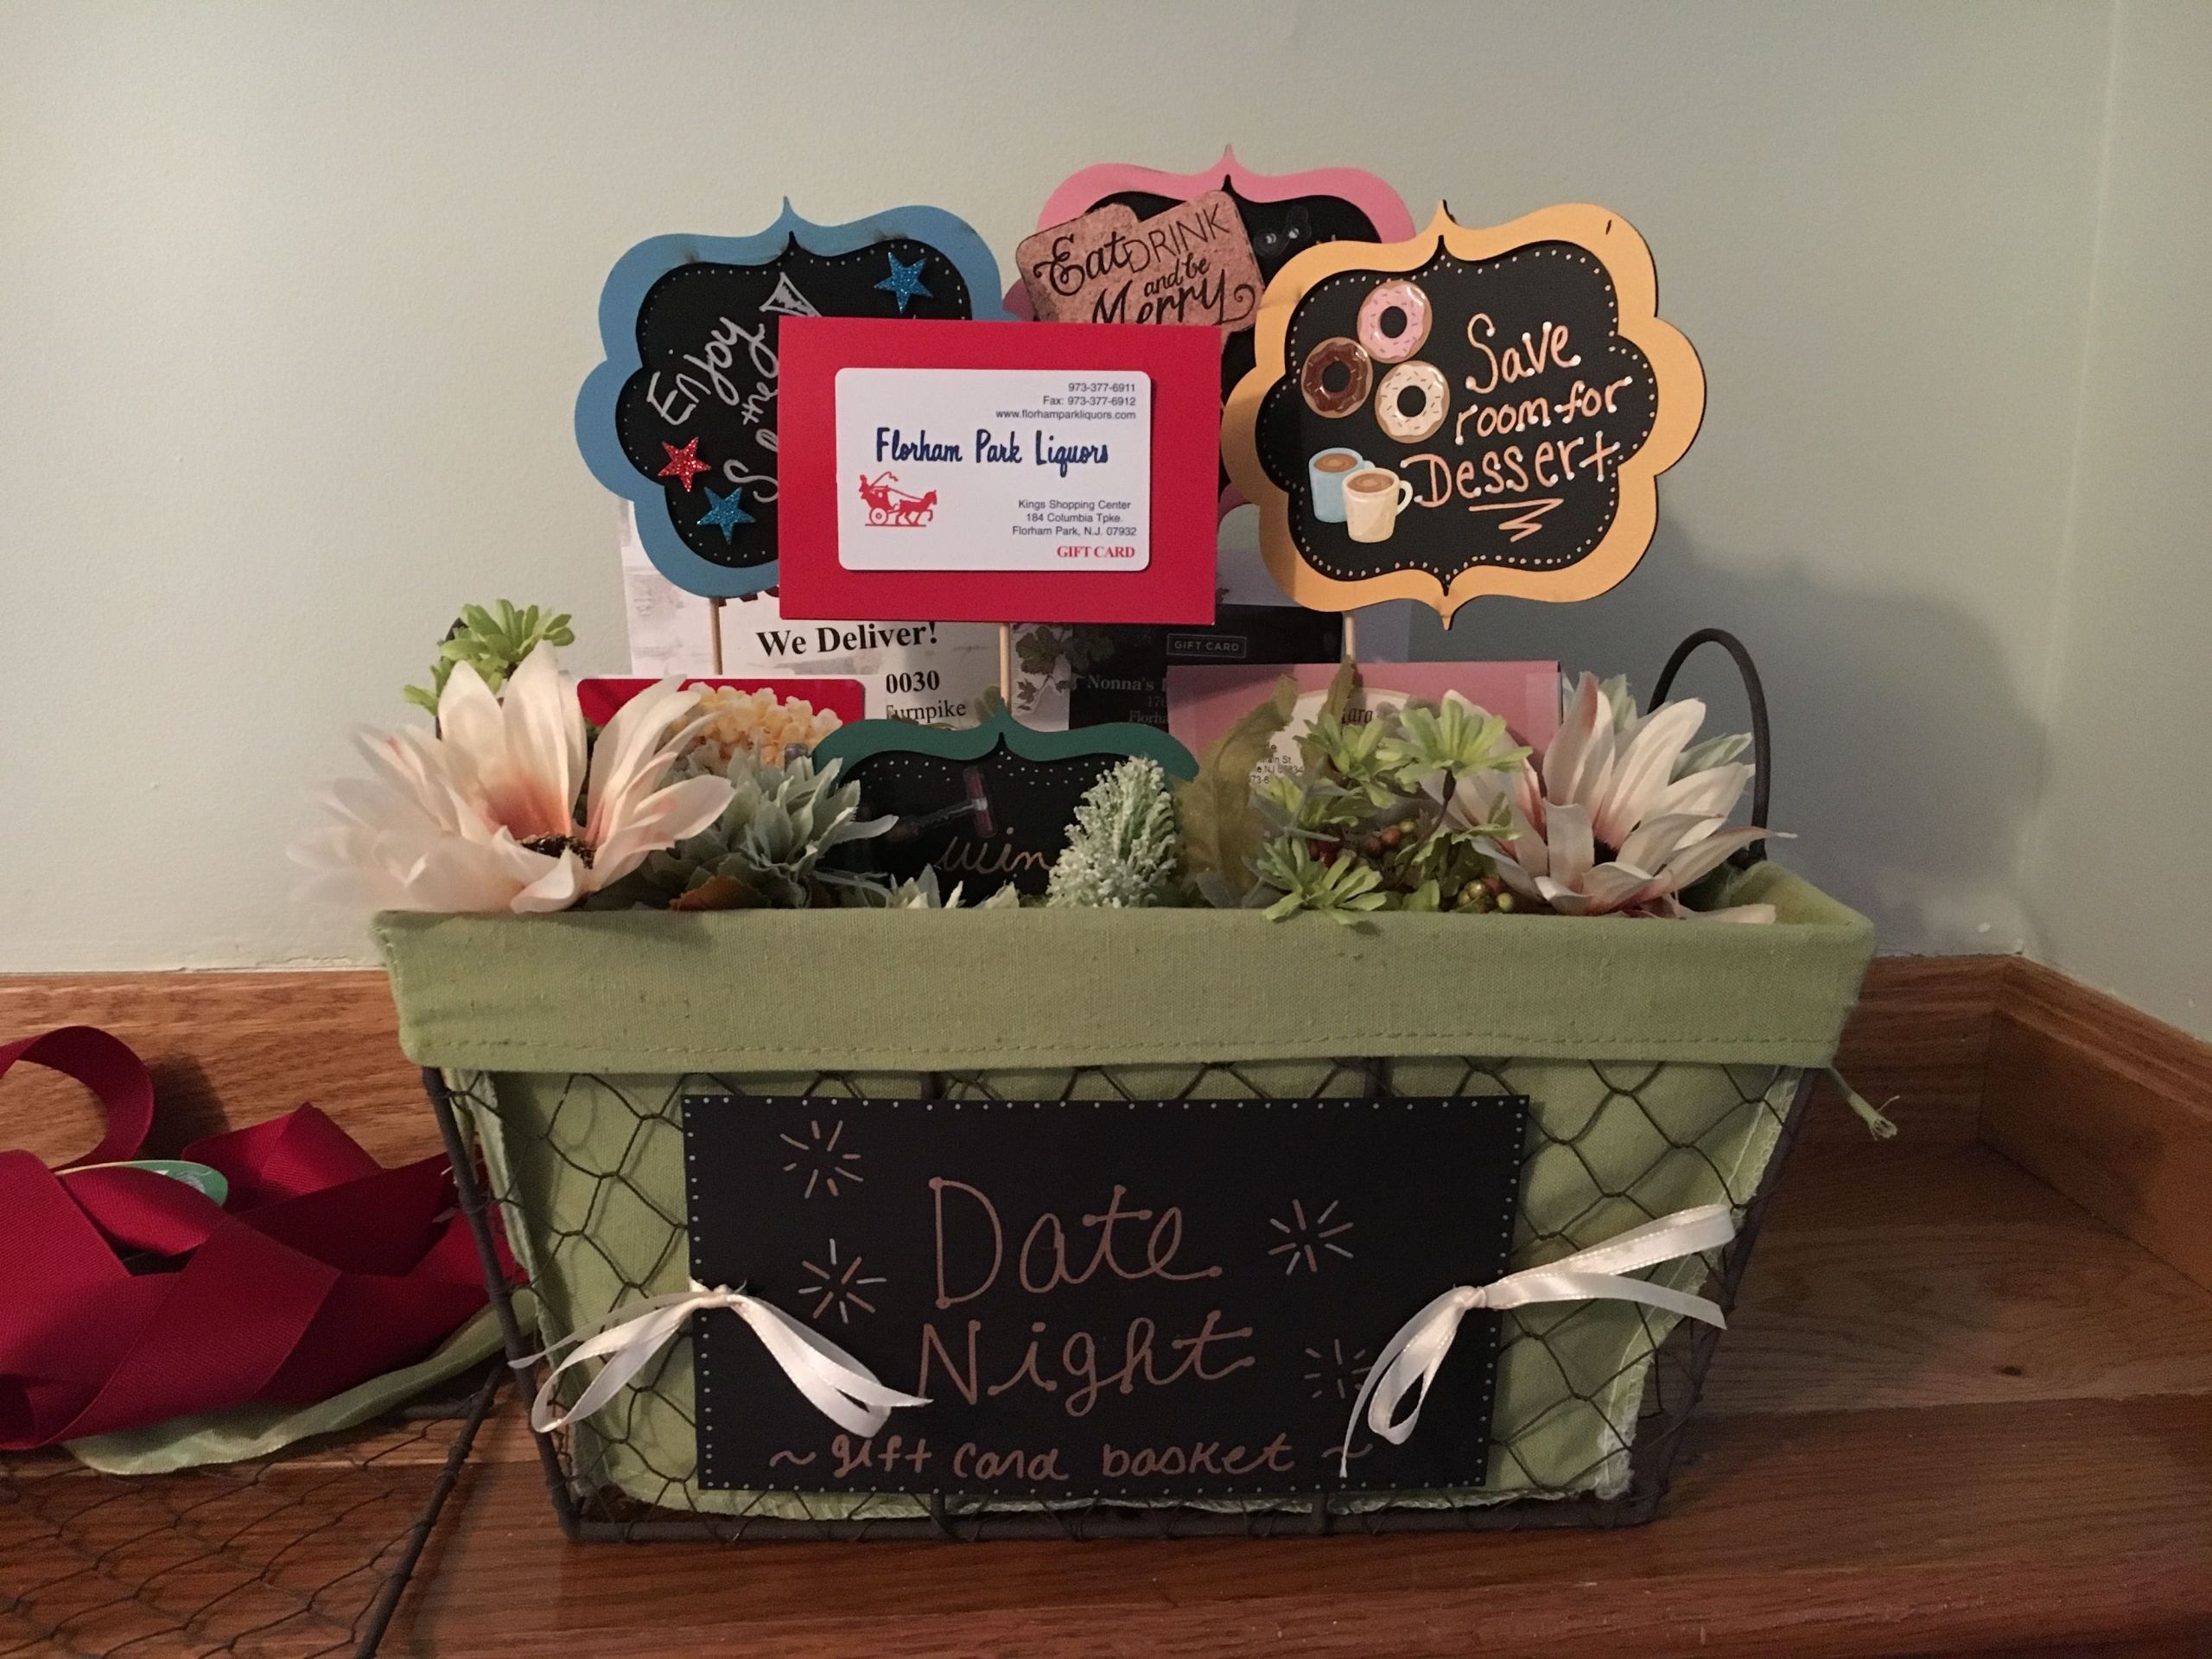 Dinner And A Movie Gift Basket Ideas
 10 Best Date Night Gift Basket Ideas 2020